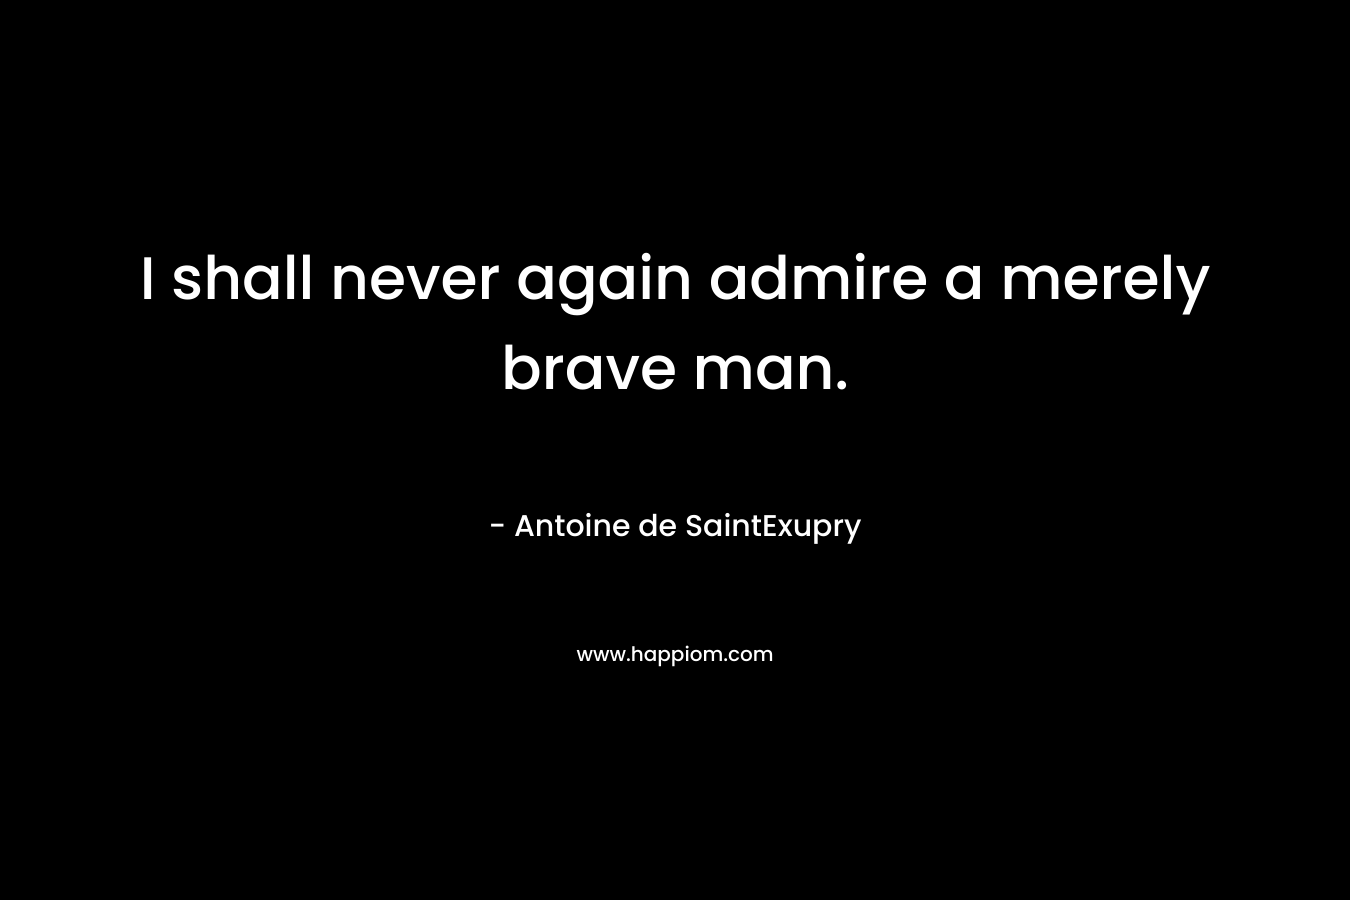 I shall never again admire a merely brave man.